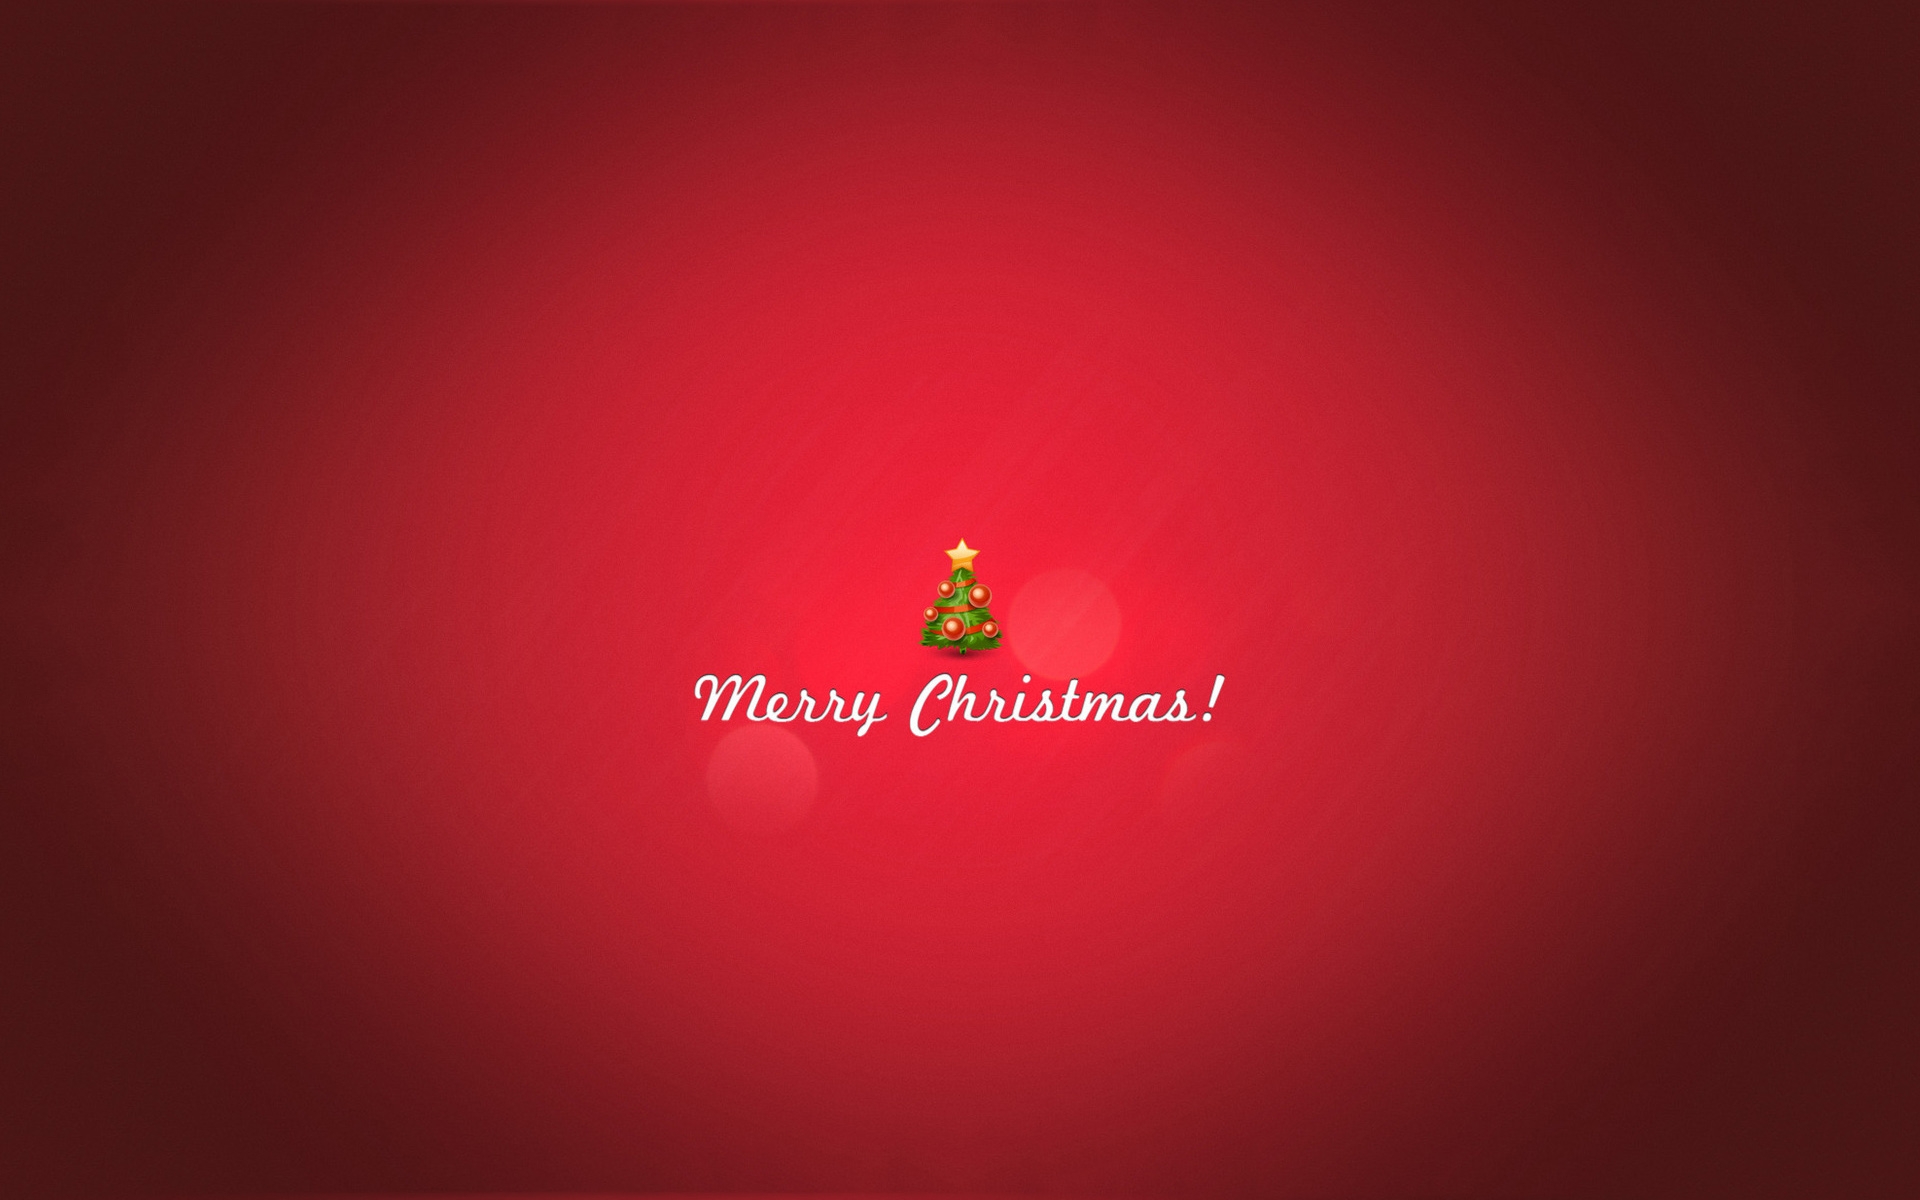 Merry Christmas 2012 Wallpapers HD Wallpapers